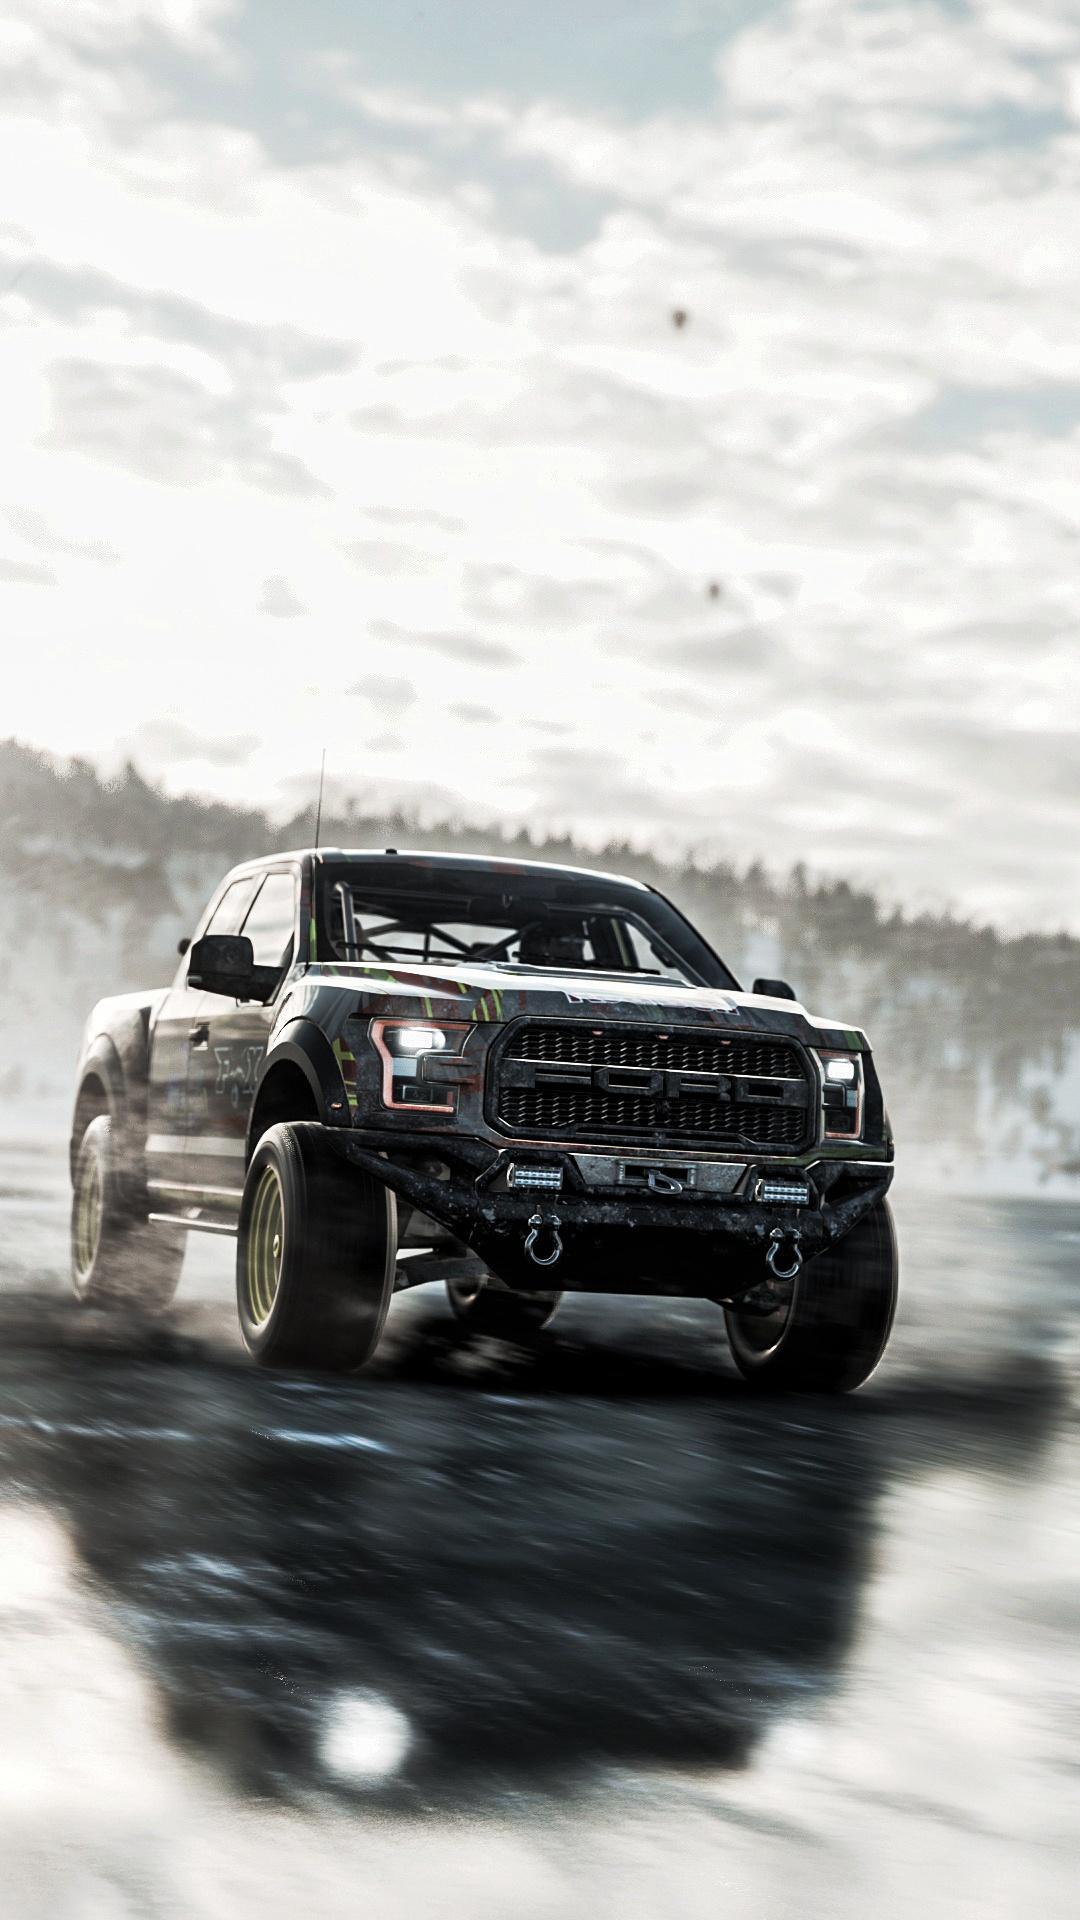 ford raptor wallpaper for iphone